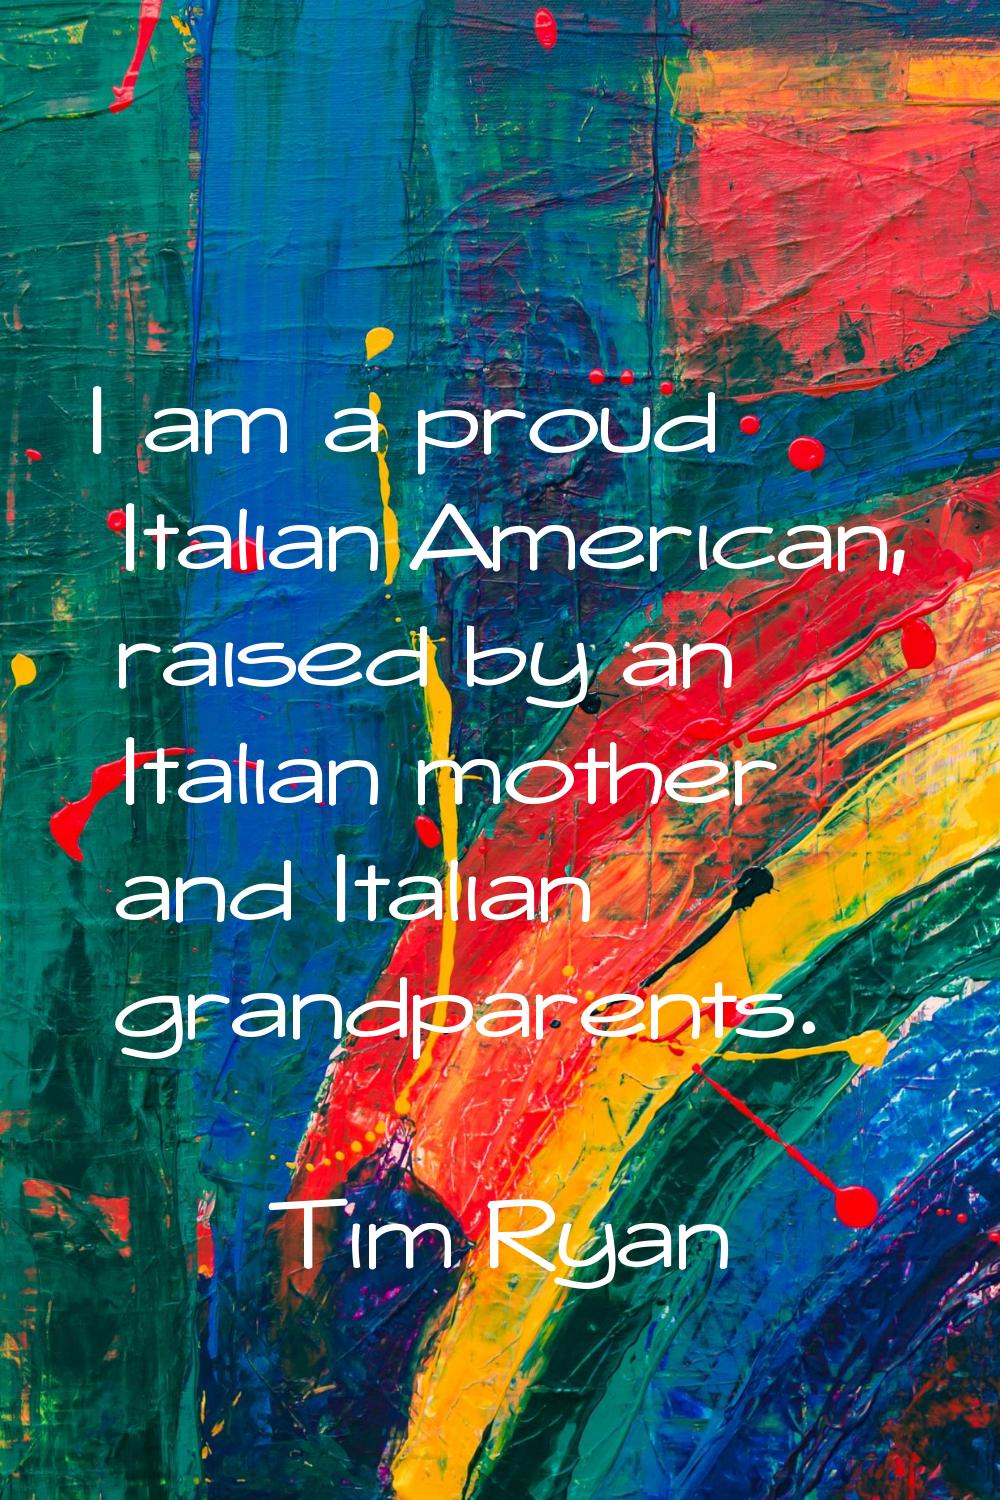 I am a proud Italian American, raised by an Italian mother and Italian grandparents.